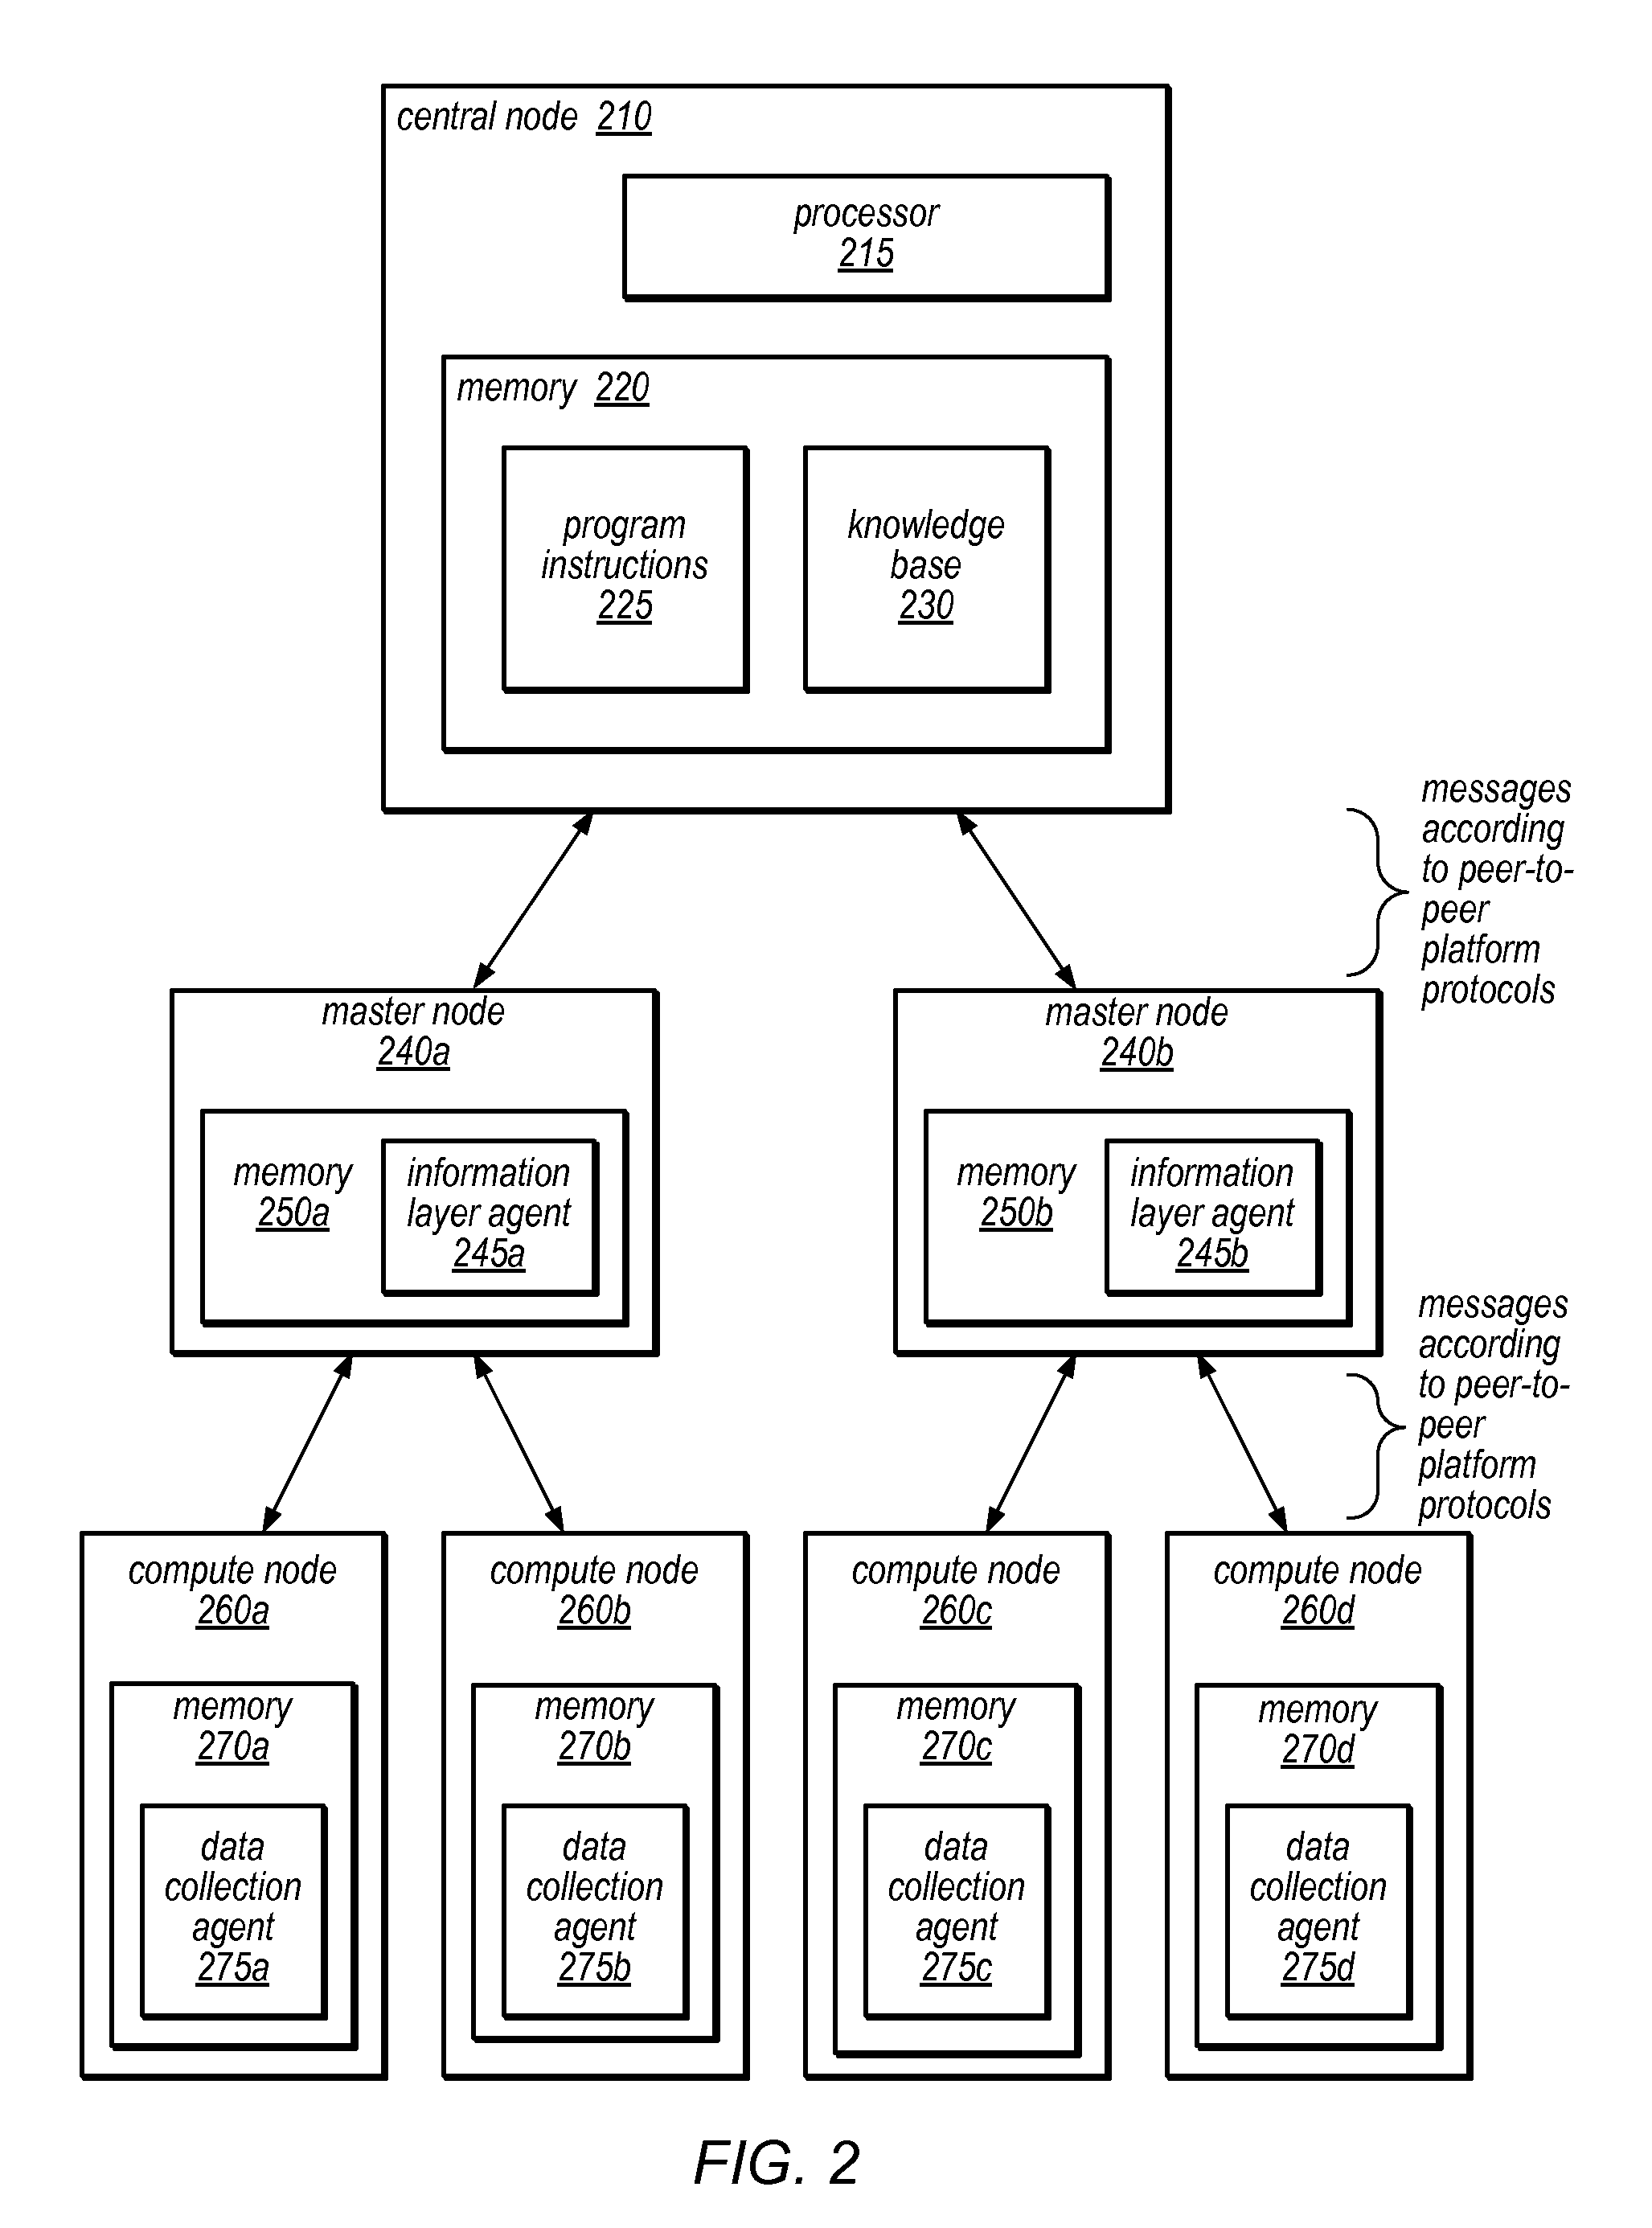 System and Method for Distributed Denial of Service Identification and Prevention